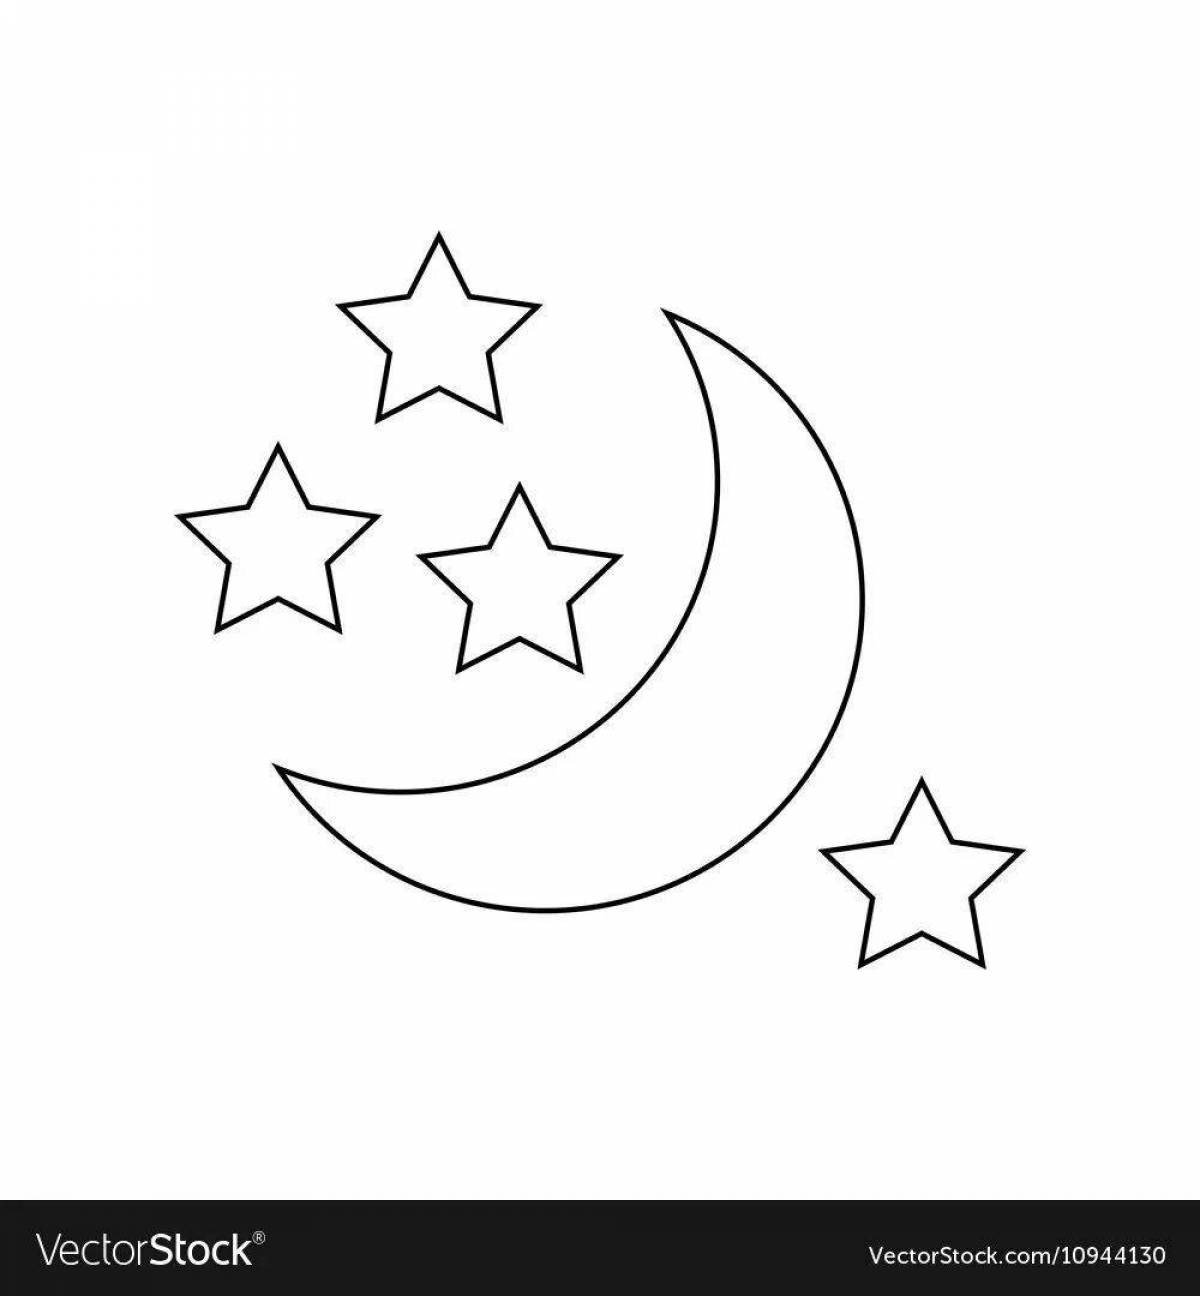 Tempting coloring moon and stars